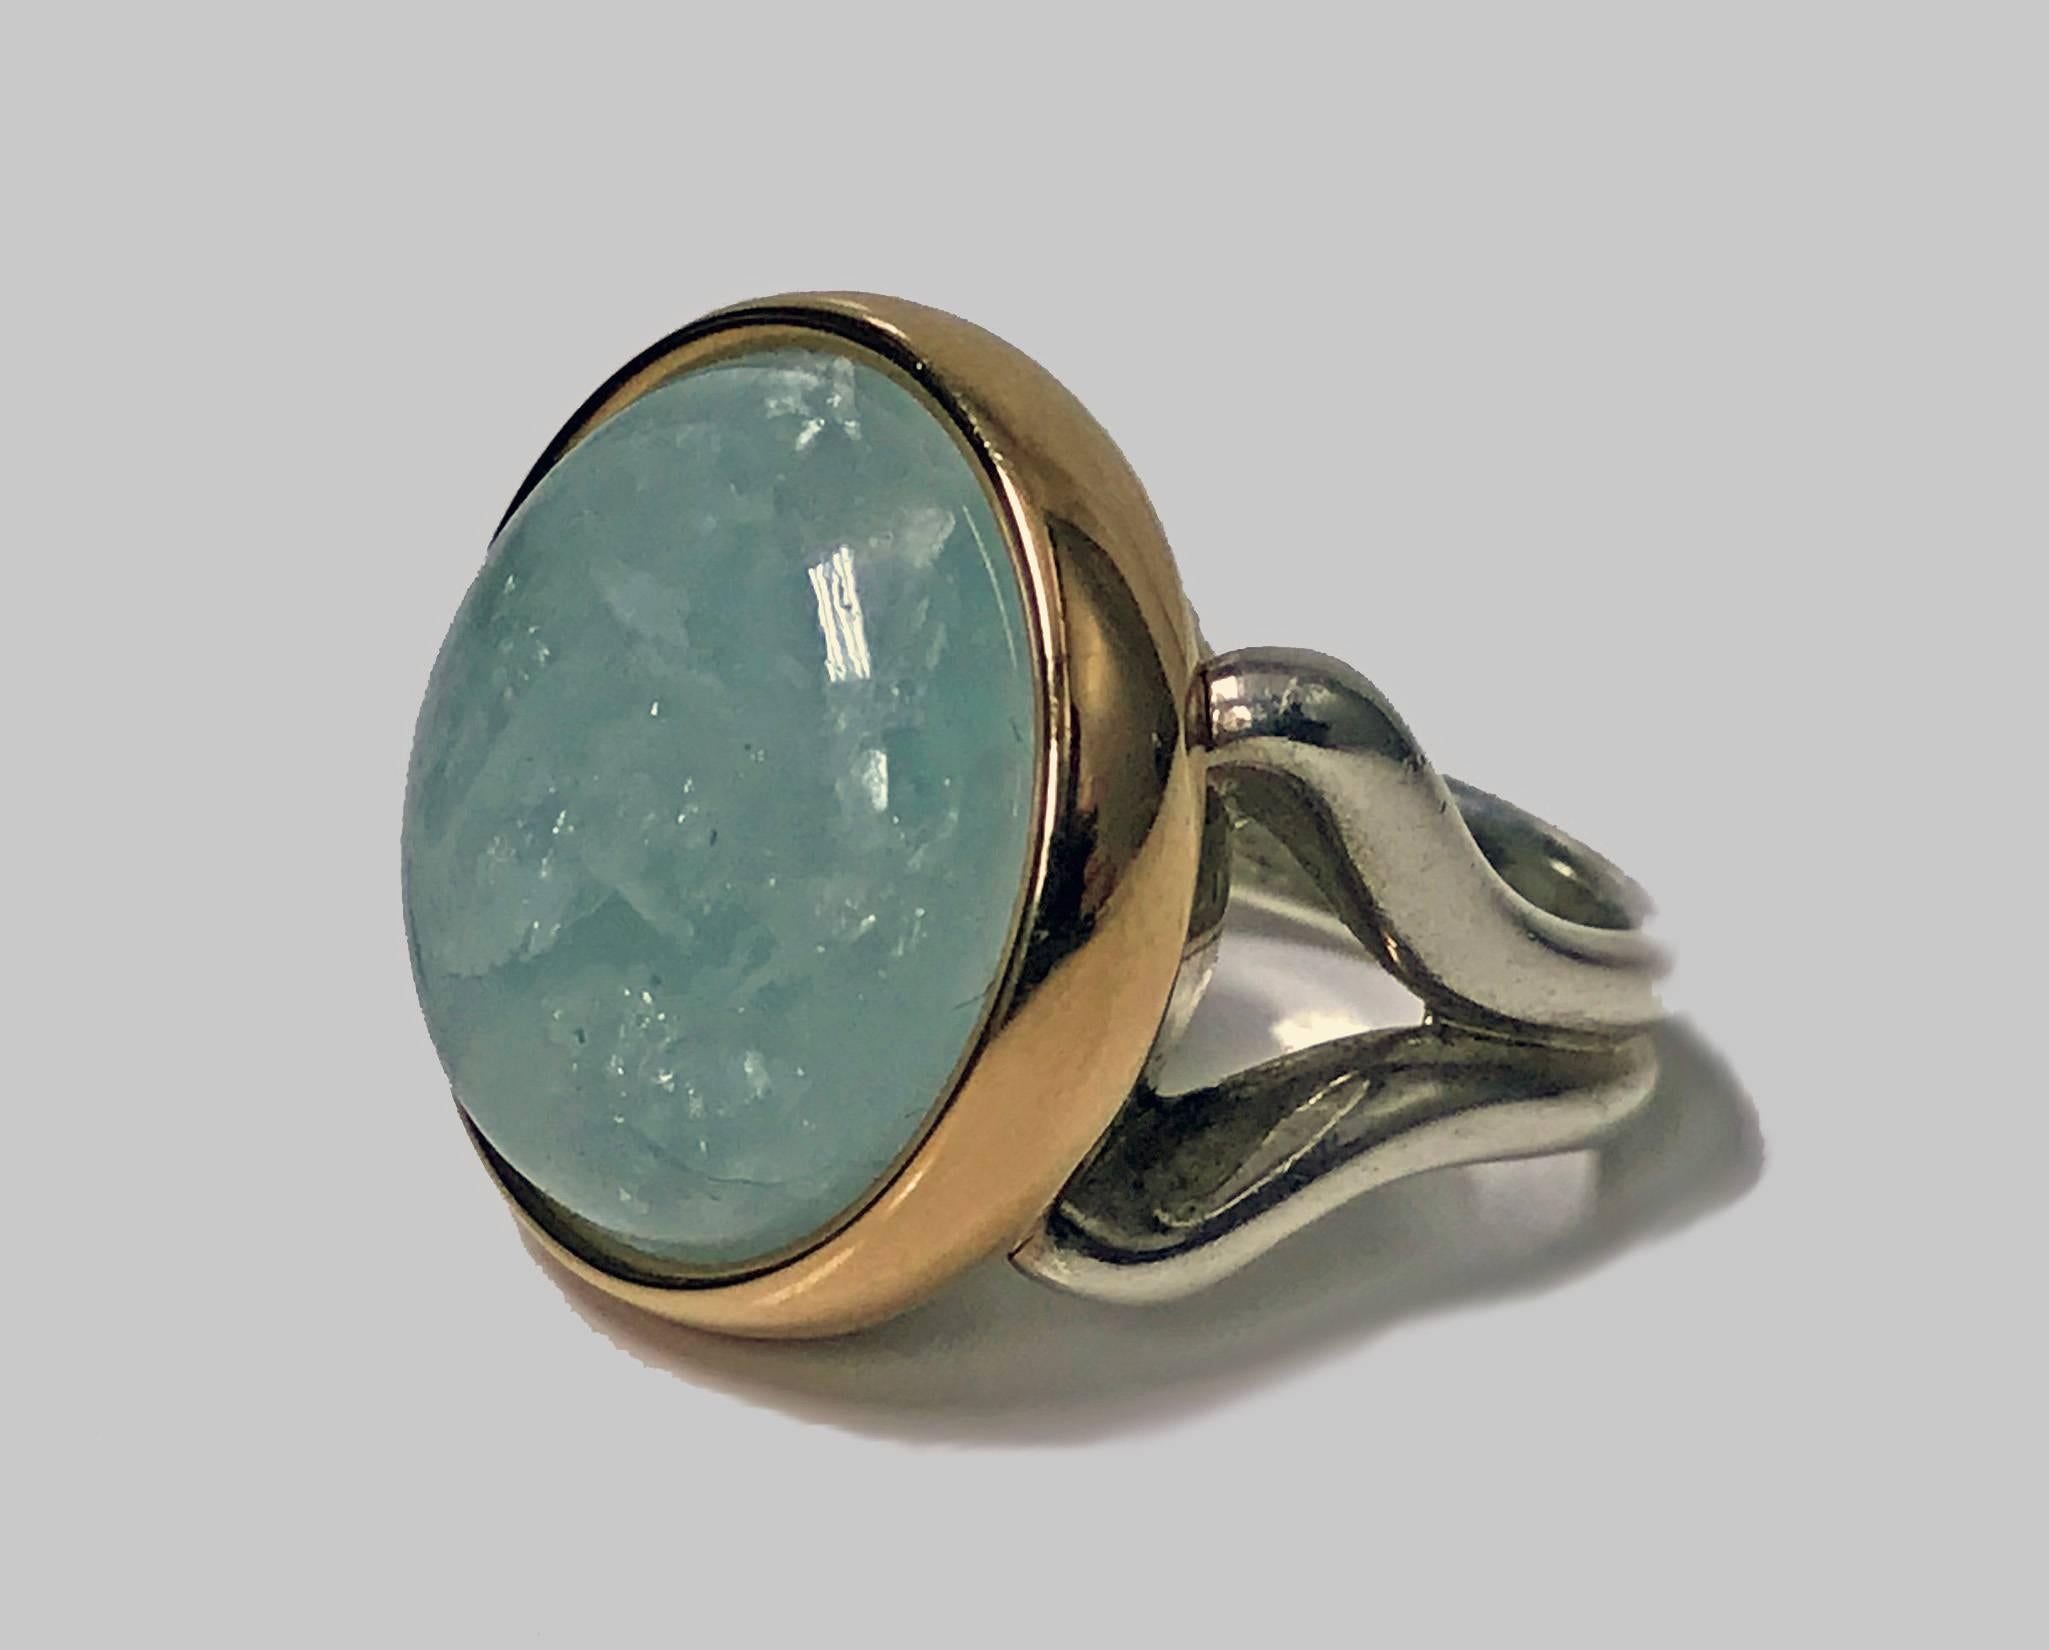 18K and Silver cabochon Aquamarine Ring. The custom designed ring 18K bezel set with a yellow green cabochon aquamarine, approximately 30 carats, included, the silver shoulders and shank of simple splay form. Total Item Weight: 23.1 gm. Ring size: 7